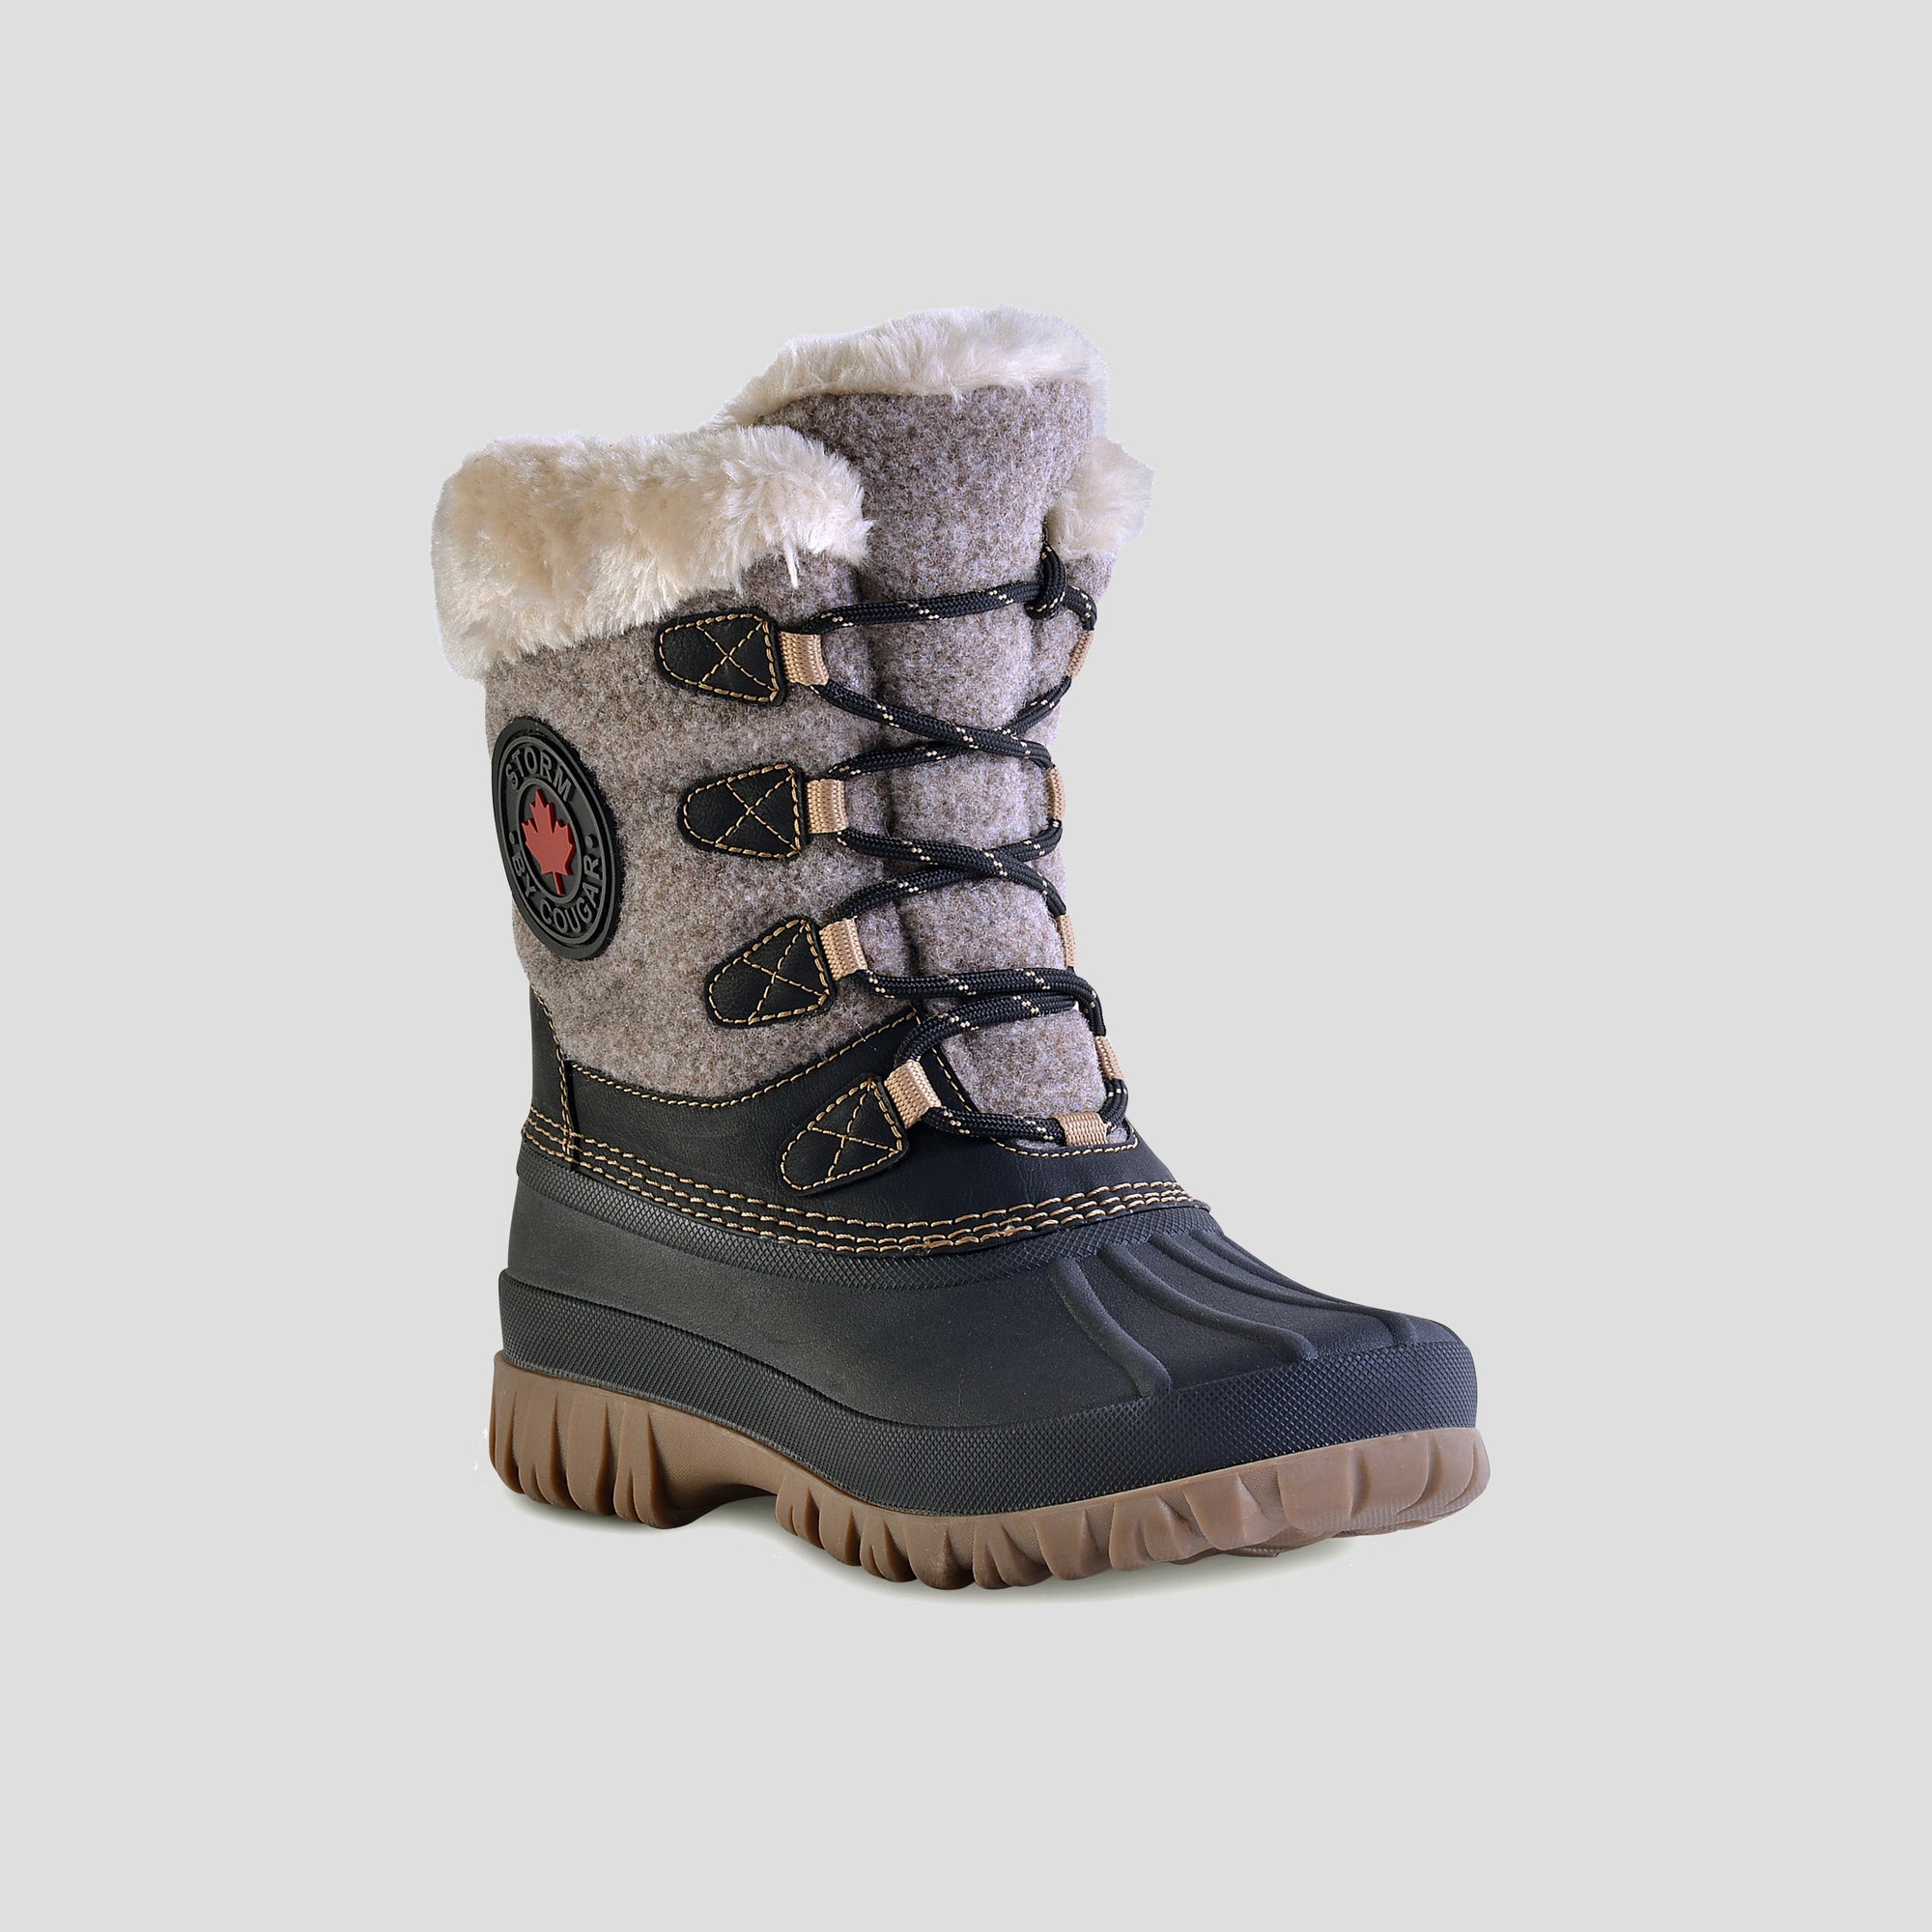 Cozy Flannel Winter Boot - Color Black-Taupe